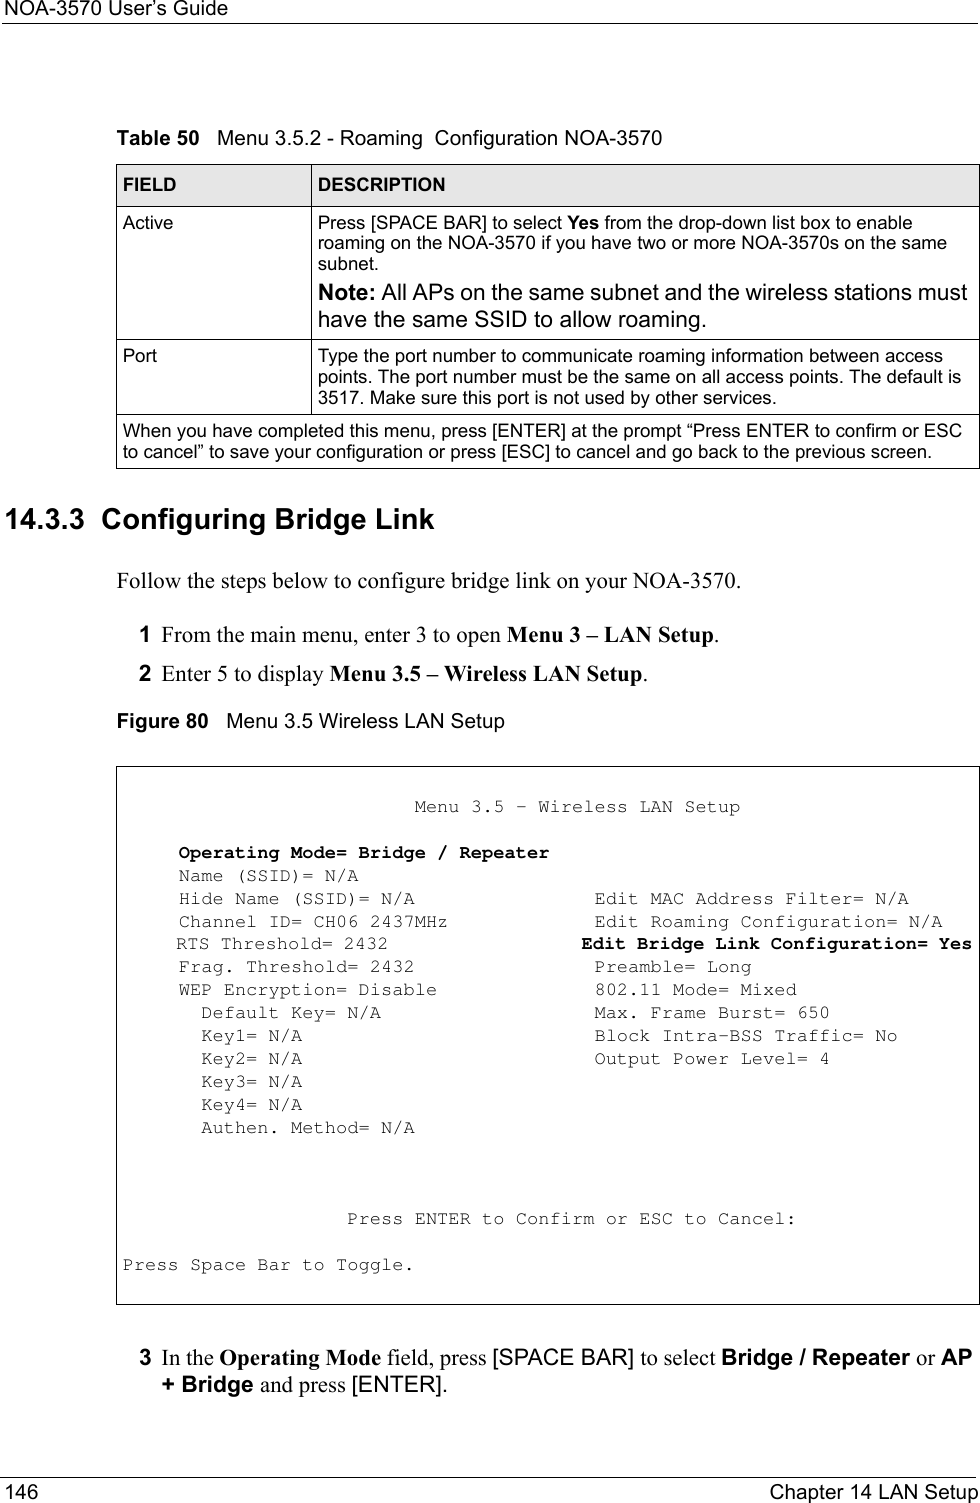 NOA-3570 User’s Guide146 Chapter 14 LAN Setup14.3.3  Configuring Bridge Link Follow the steps below to configure bridge link on your NOA-3570.1From the main menu, enter 3 to open Menu 3 – LAN Setup.2Enter 5 to display Menu 3.5 – Wireless LAN Setup. Figure 80   Menu 3.5 Wireless LAN Setup3In the Operating Mode field, press [SPACE BAR] to select Bridge / Repeater or AP + Bridge and press [ENTER].Table 50   Menu 3.5.2 - Roaming  Configuration NOA-3570FIELD DESCRIPTIONActive Press [SPACE BAR] to select Yes from the drop-down list box to enable roaming on the NOA-3570 if you have two or more NOA-3570s on the same subnet.Note: All APs on the same subnet and the wireless stations must have the same SSID to allow roaming.Port Type the port number to communicate roaming information between access points. The port number must be the same on all access points. The default is 3517. Make sure this port is not used by other services. When you have completed this menu, press [ENTER] at the prompt “Press ENTER to confirm or ESC to cancel” to save your configuration or press [ESC] to cancel and go back to the previous screen.                          Menu 3.5 - Wireless LAN Setup     Operating Mode= Bridge / Repeater     Name (SSID)= N/A     Hide Name (SSID)= N/A                Edit MAC Address Filter= N/A     Channel ID= CH06 2437MHz             Edit Roaming Configuration= N/A     RTS Threshold= 2432                  Edit Bridge Link Configuration= Yes     Frag. Threshold= 2432                Preamble= Long     WEP Encryption= Disable              802.11 Mode= Mixed       Default Key= N/A                   Max. Frame Burst= 650       Key1= N/A                          Block Intra-BSS Traffic= No       Key2= N/A                          Output Power Level= 4       Key3= N/A       Key4= N/A       Authen. Method= N/A                    Press ENTER to Confirm or ESC to Cancel:Press Space Bar to Toggle.